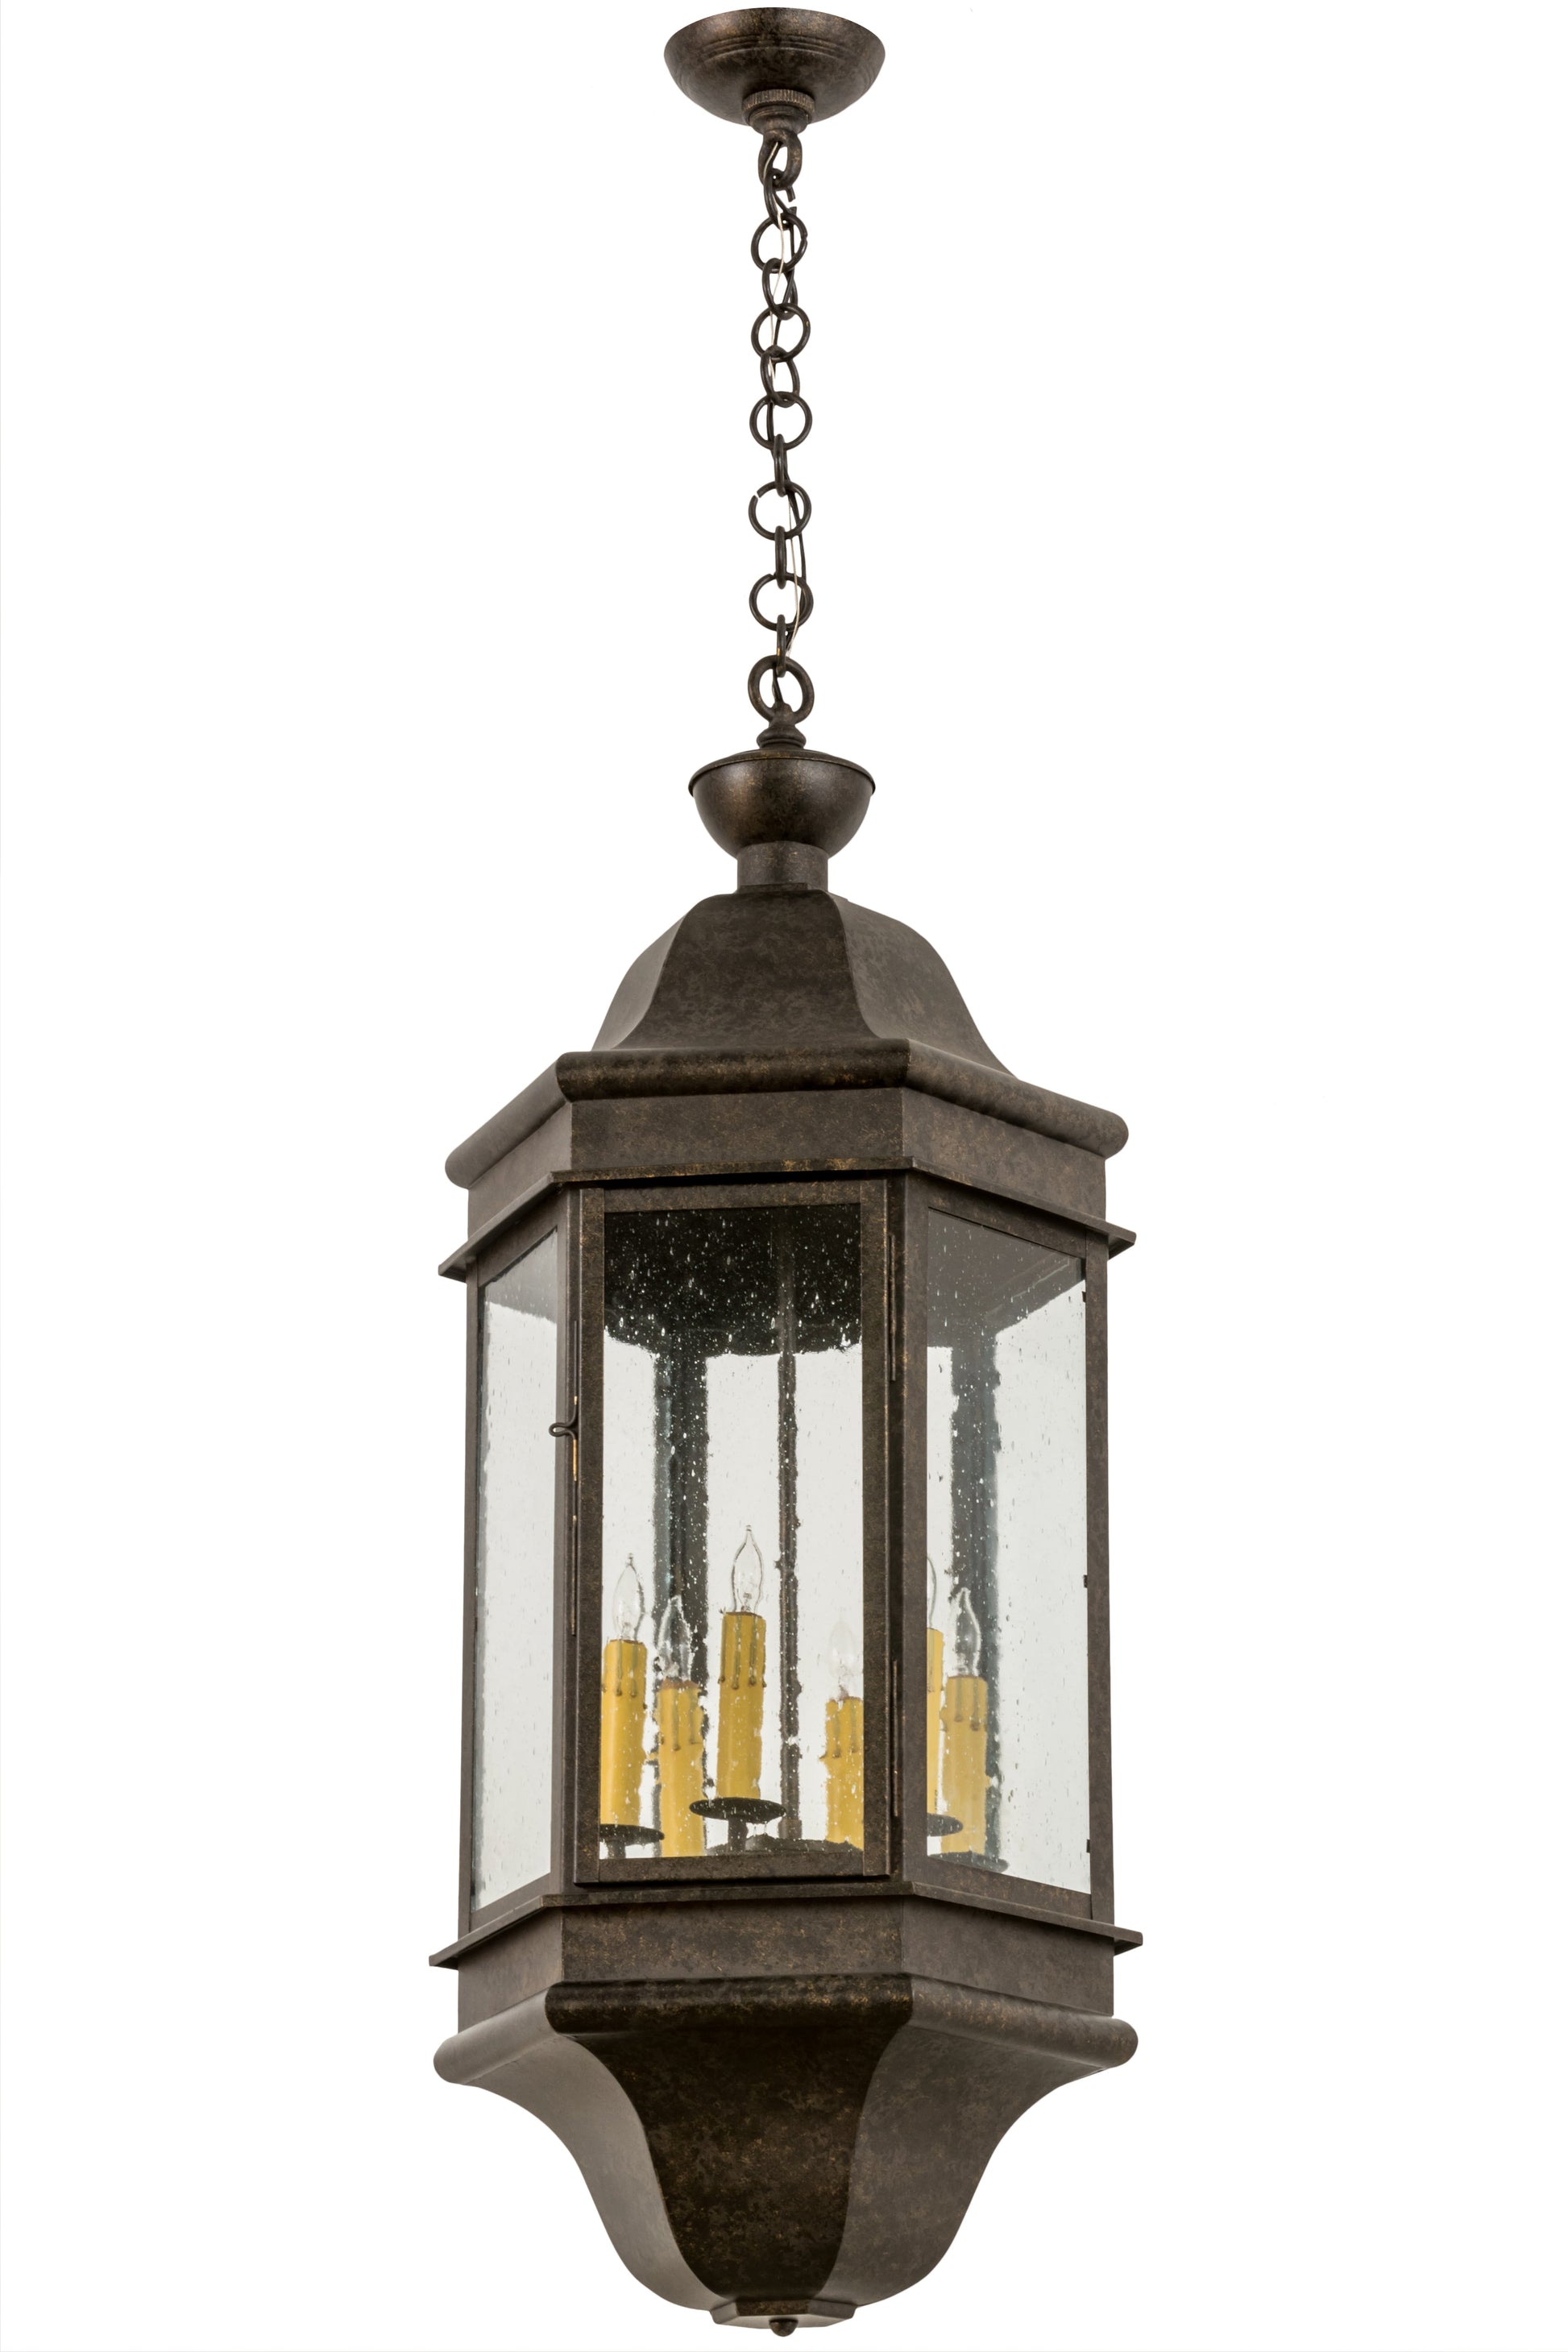 15" Gascony Pendant by 2nd Ave Lighting